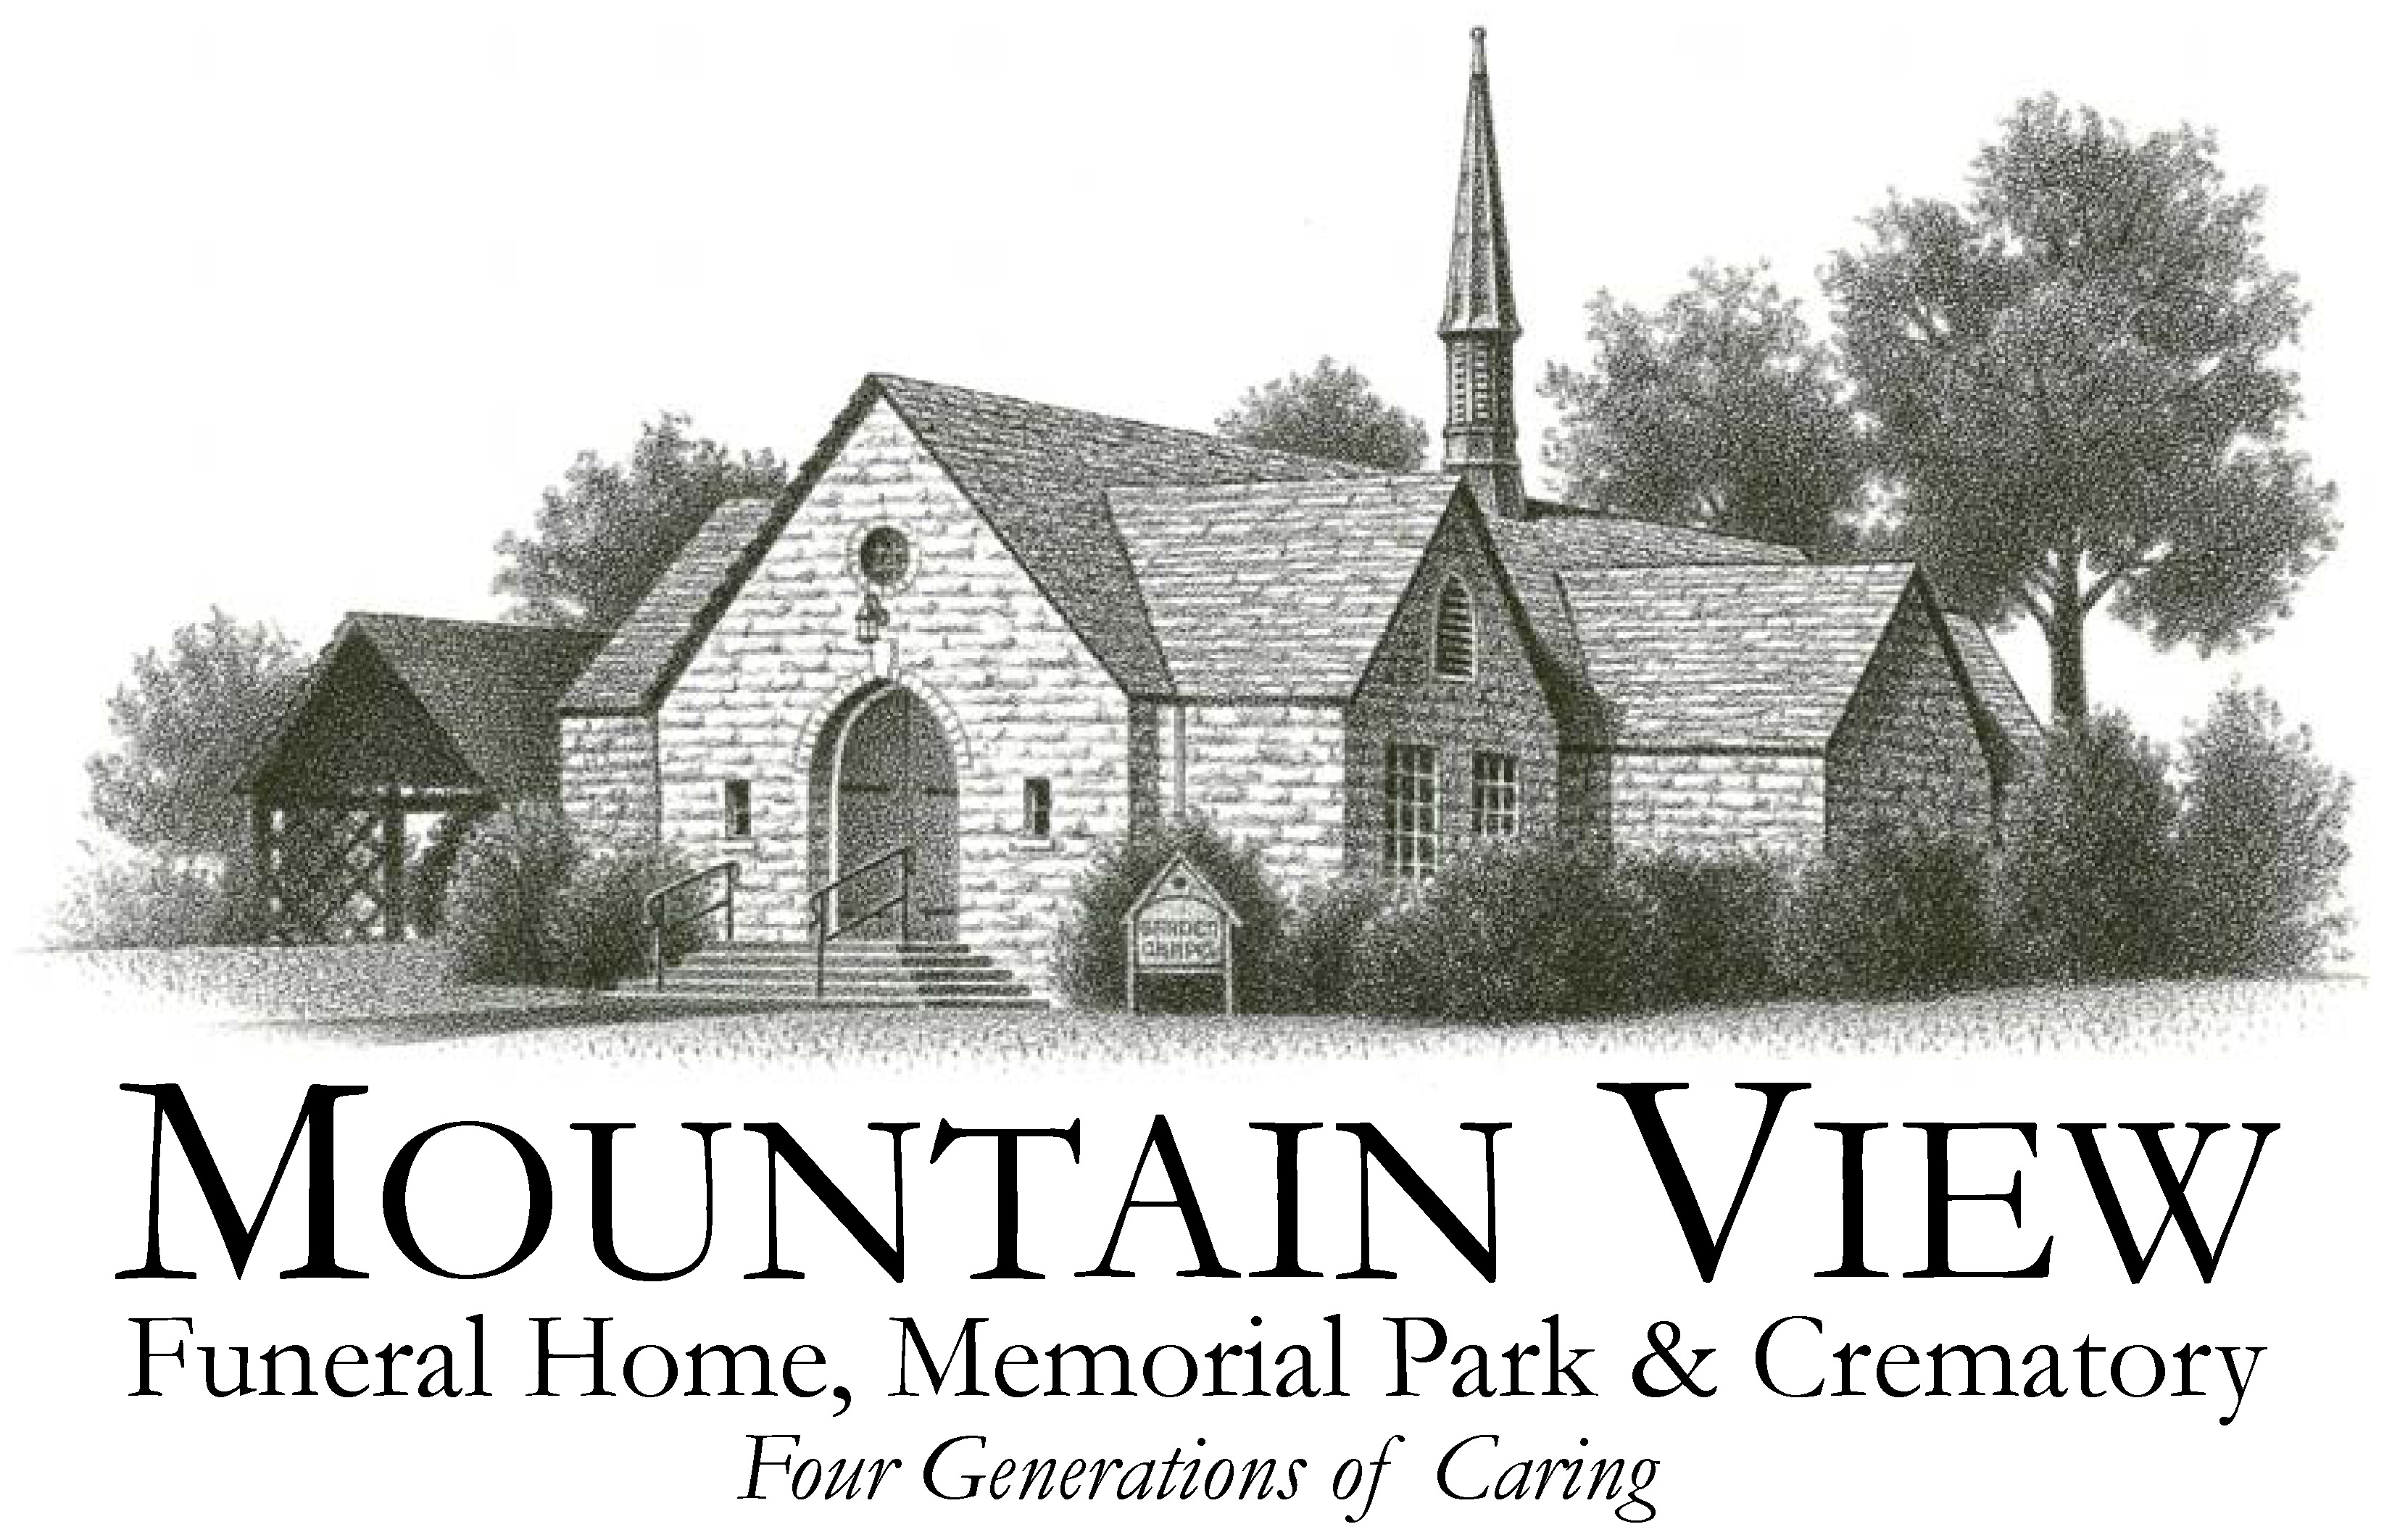 Mountain View Funeral Home, Memorial Park & Crematory.